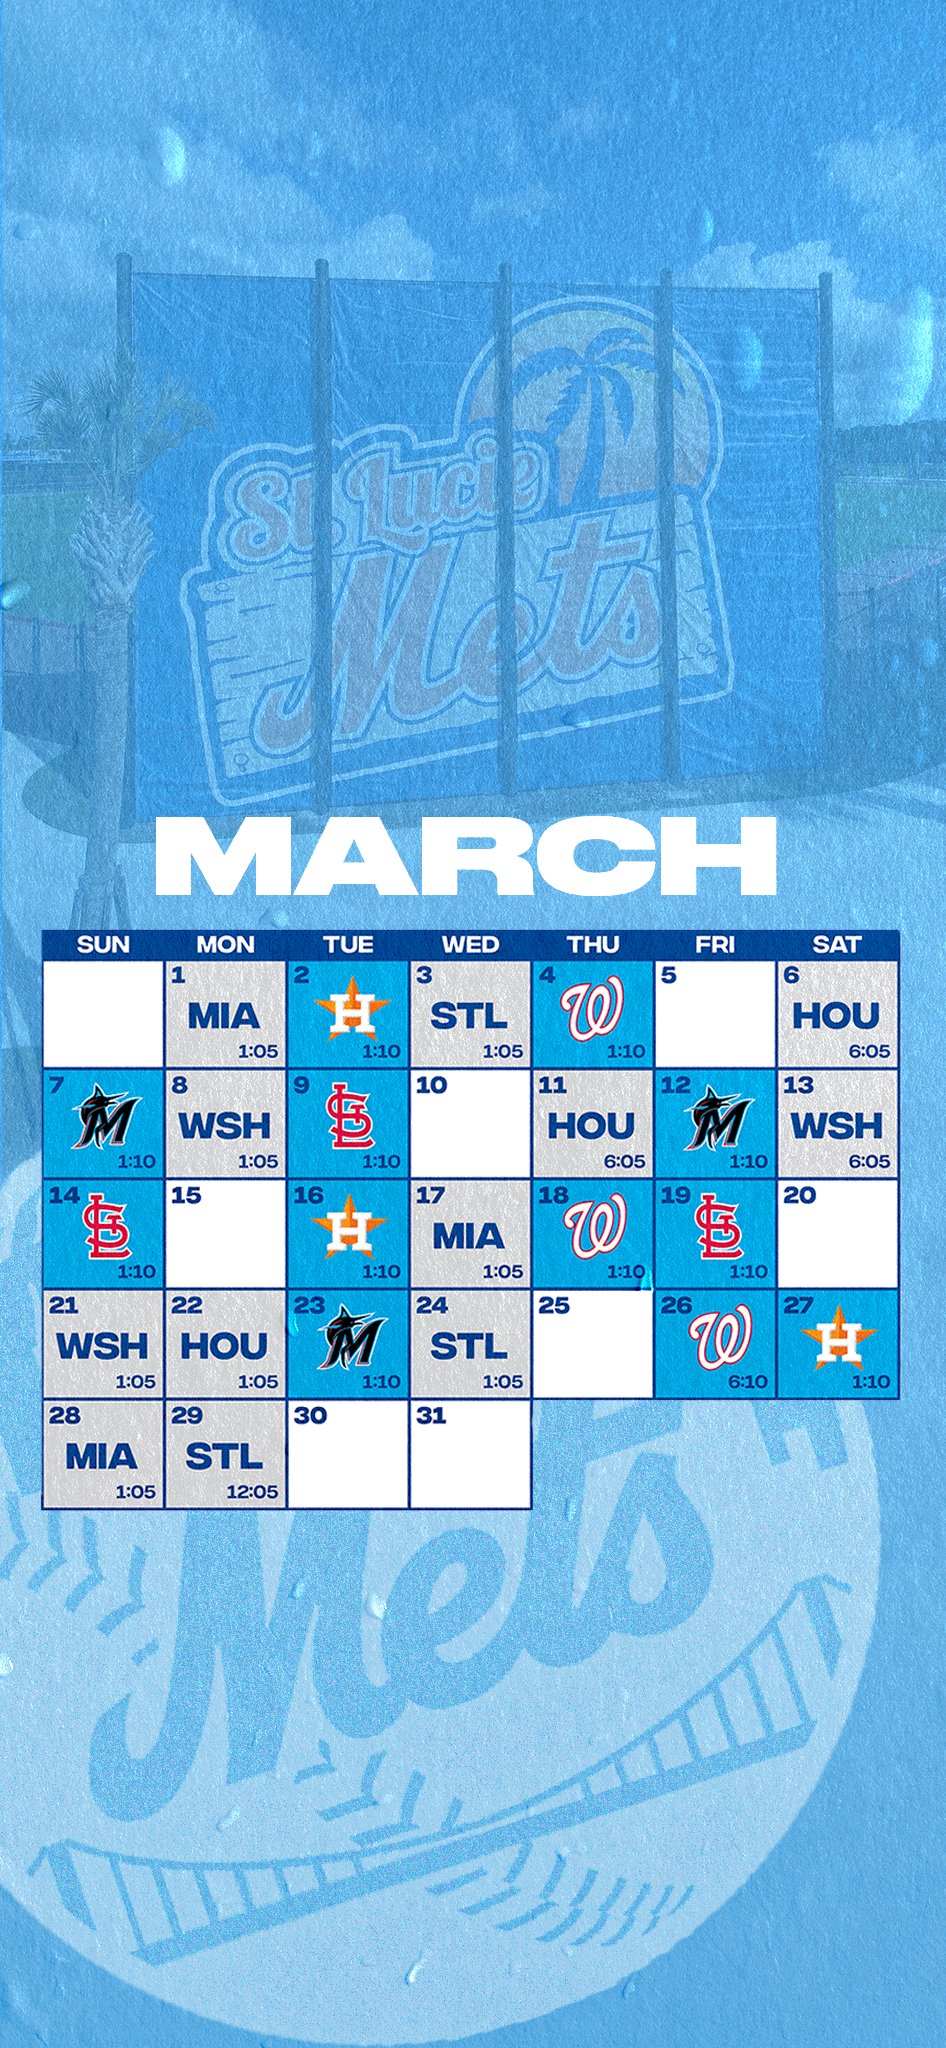 New York Mets  Check out our full 2022 schedule   Facebook